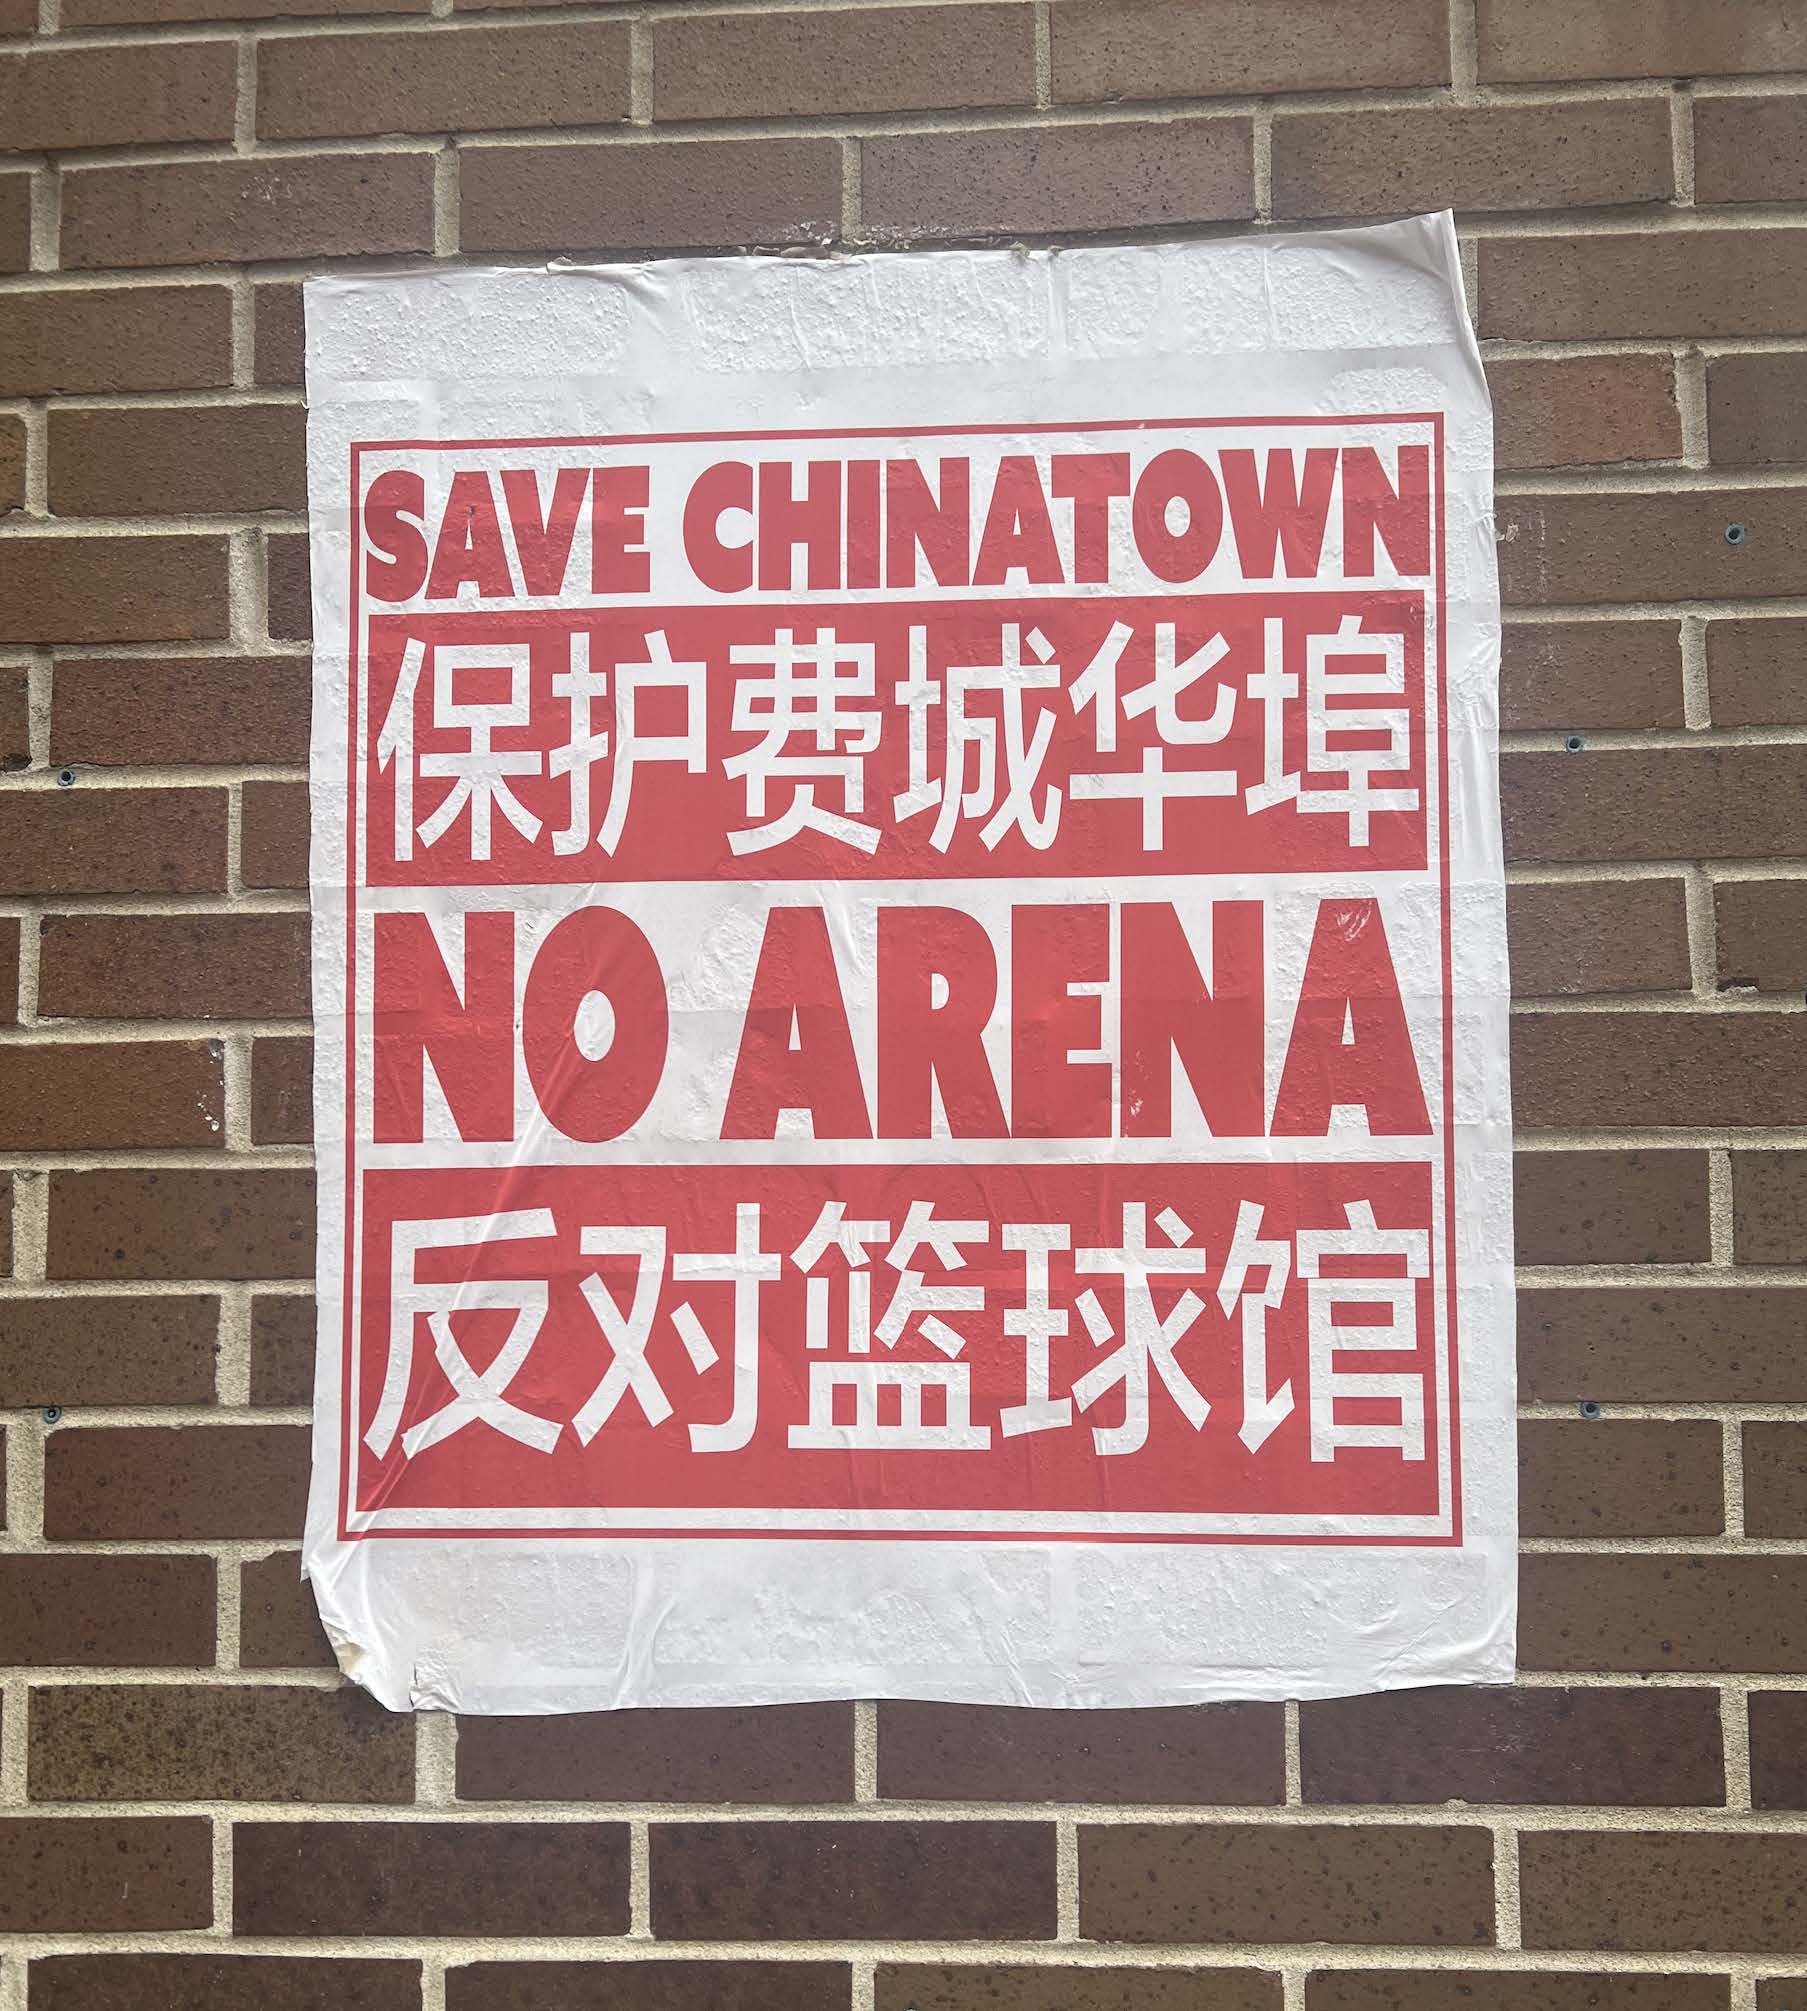 Vivian Hoang '24, a history and self-designed journalism double major, traveled to Philadelphia to report on a proposed development near Chinatown. (Photo by Vivian Hoang)